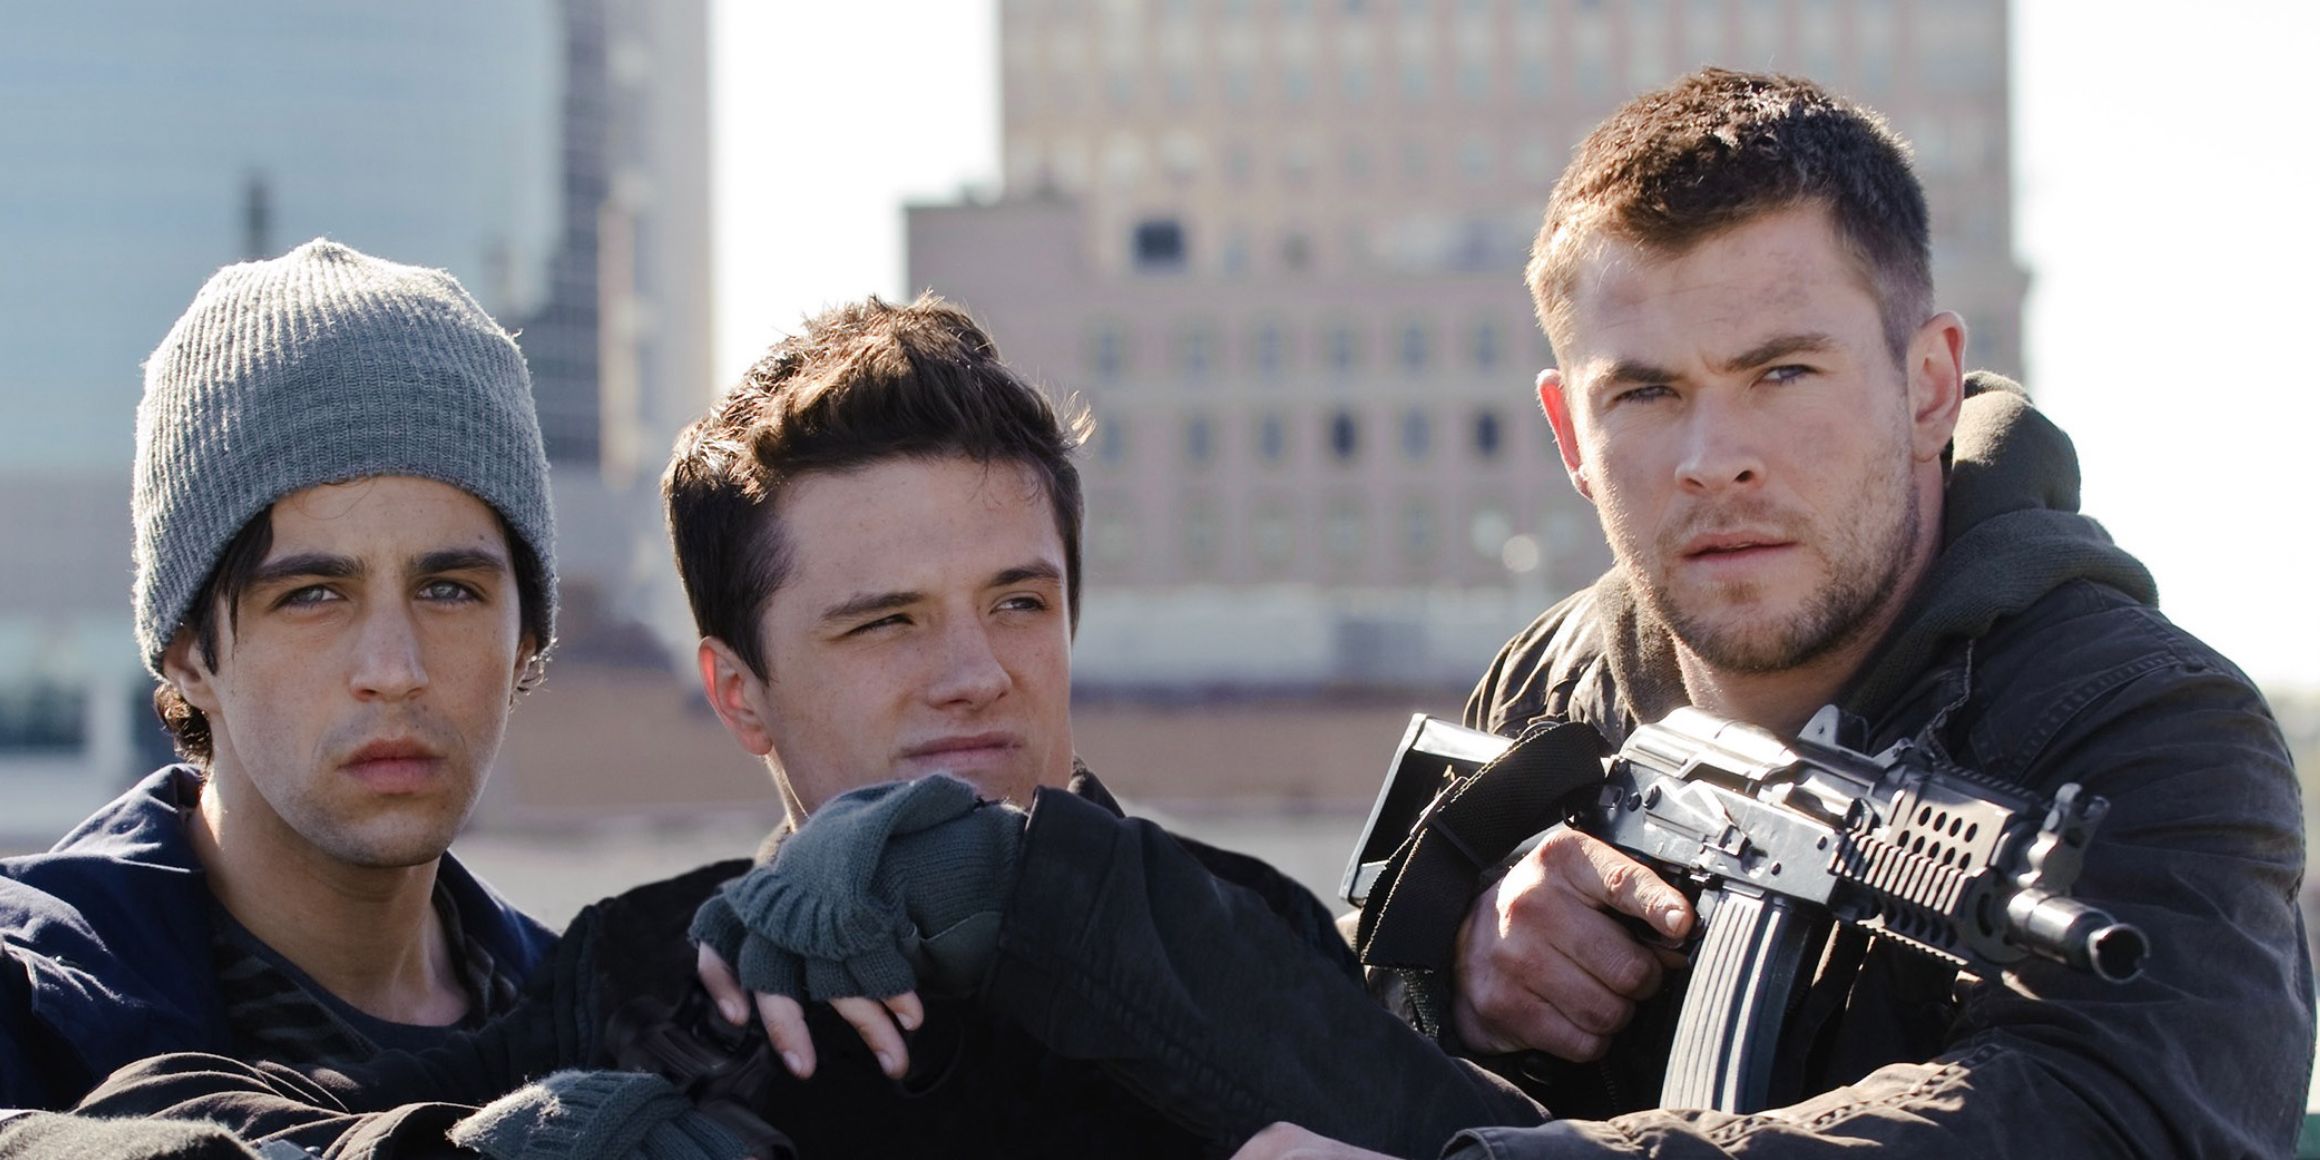 Matt, Robert, and Jed spying on enemies in Red Dawn